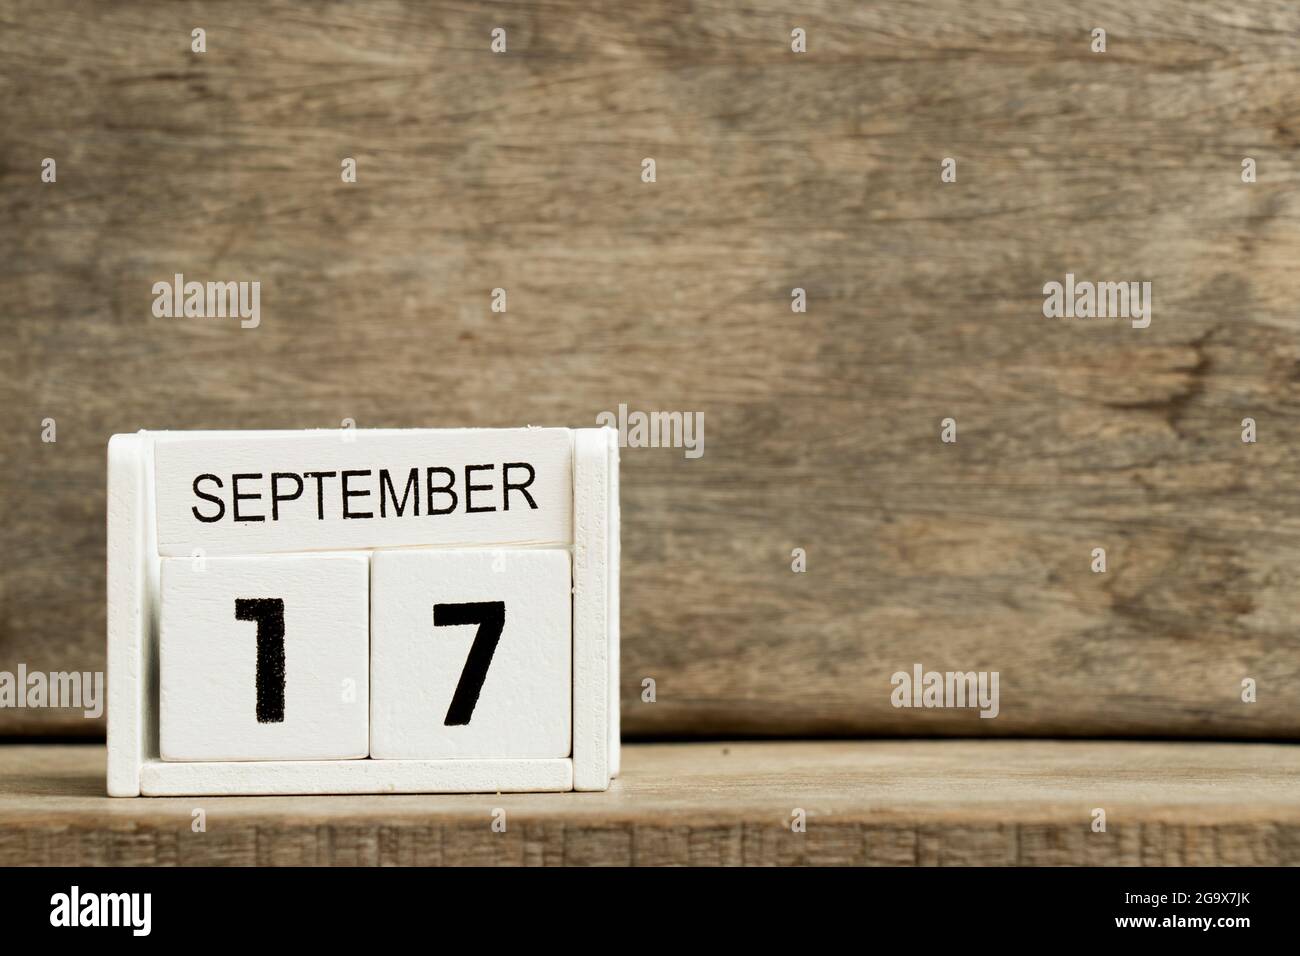 White block calendar present date 17 and month September on wood background Stock Photo